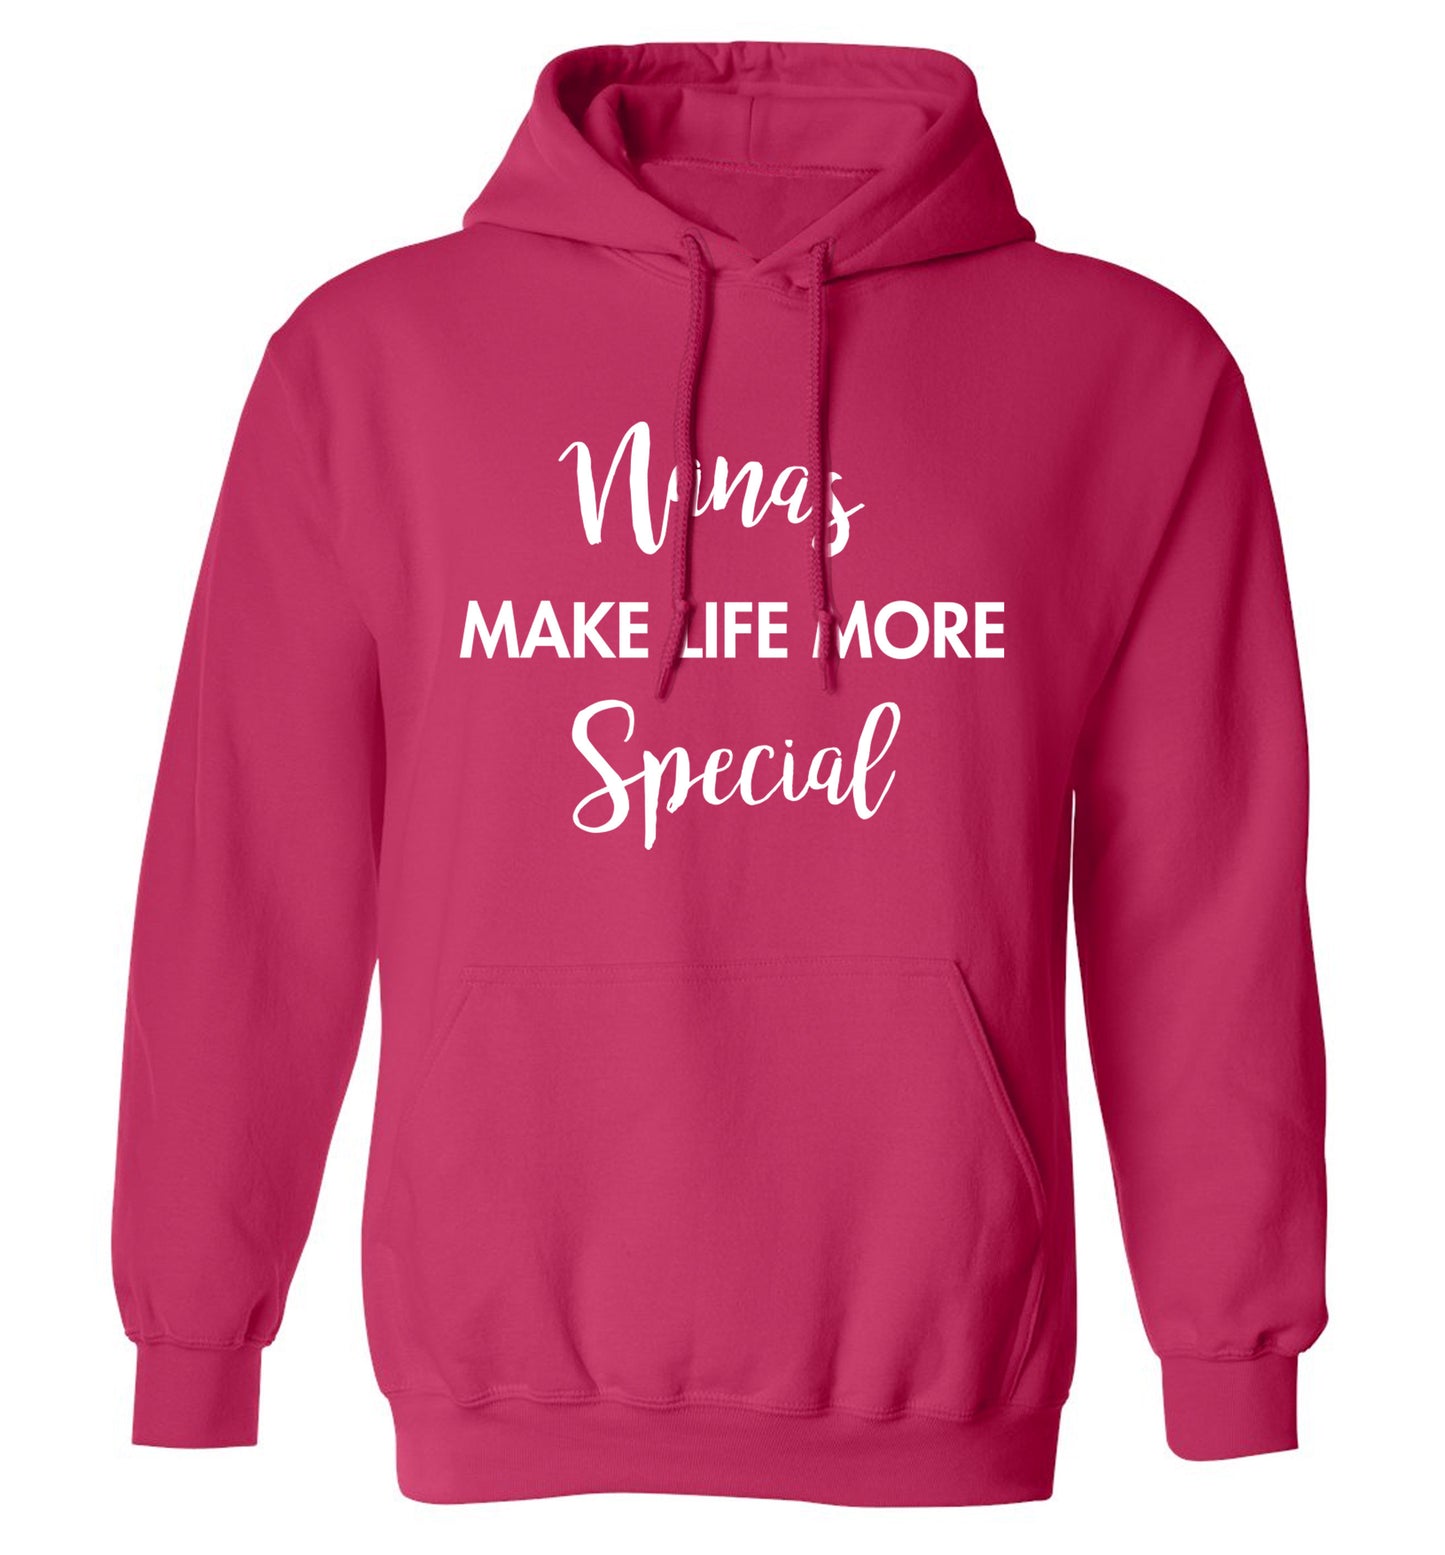 Nanas make life more special adults unisex pink hoodie 2XL